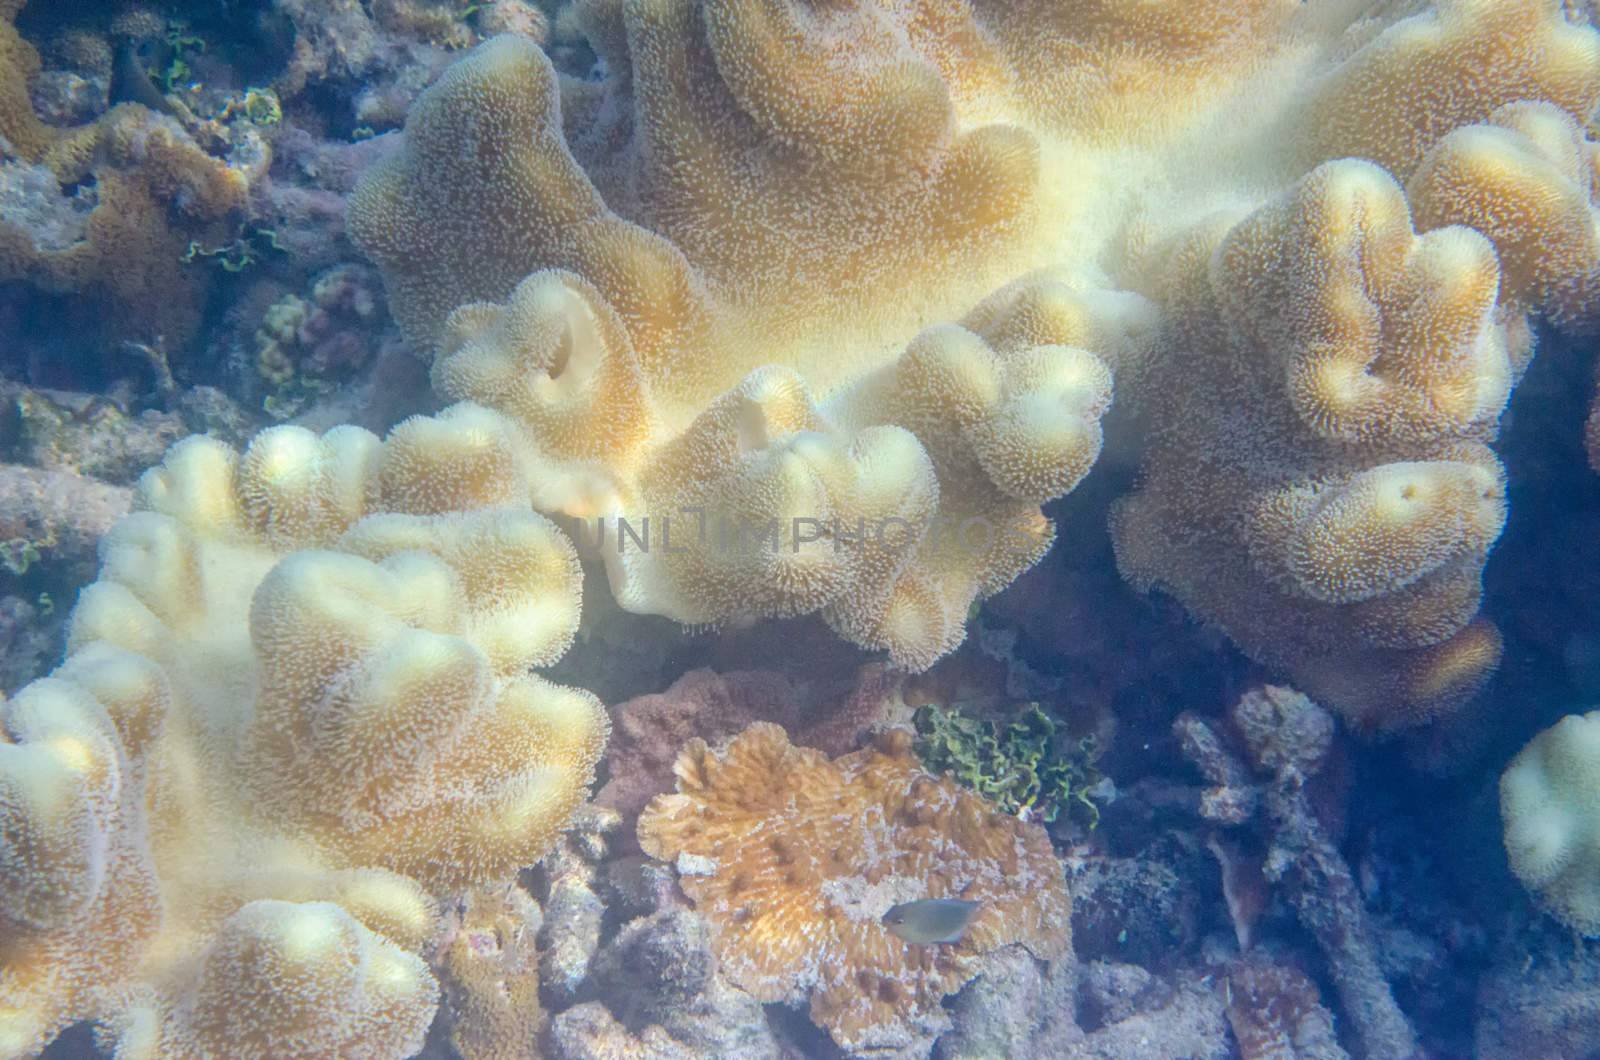 Underwater Aquatic Living Coral by mroz